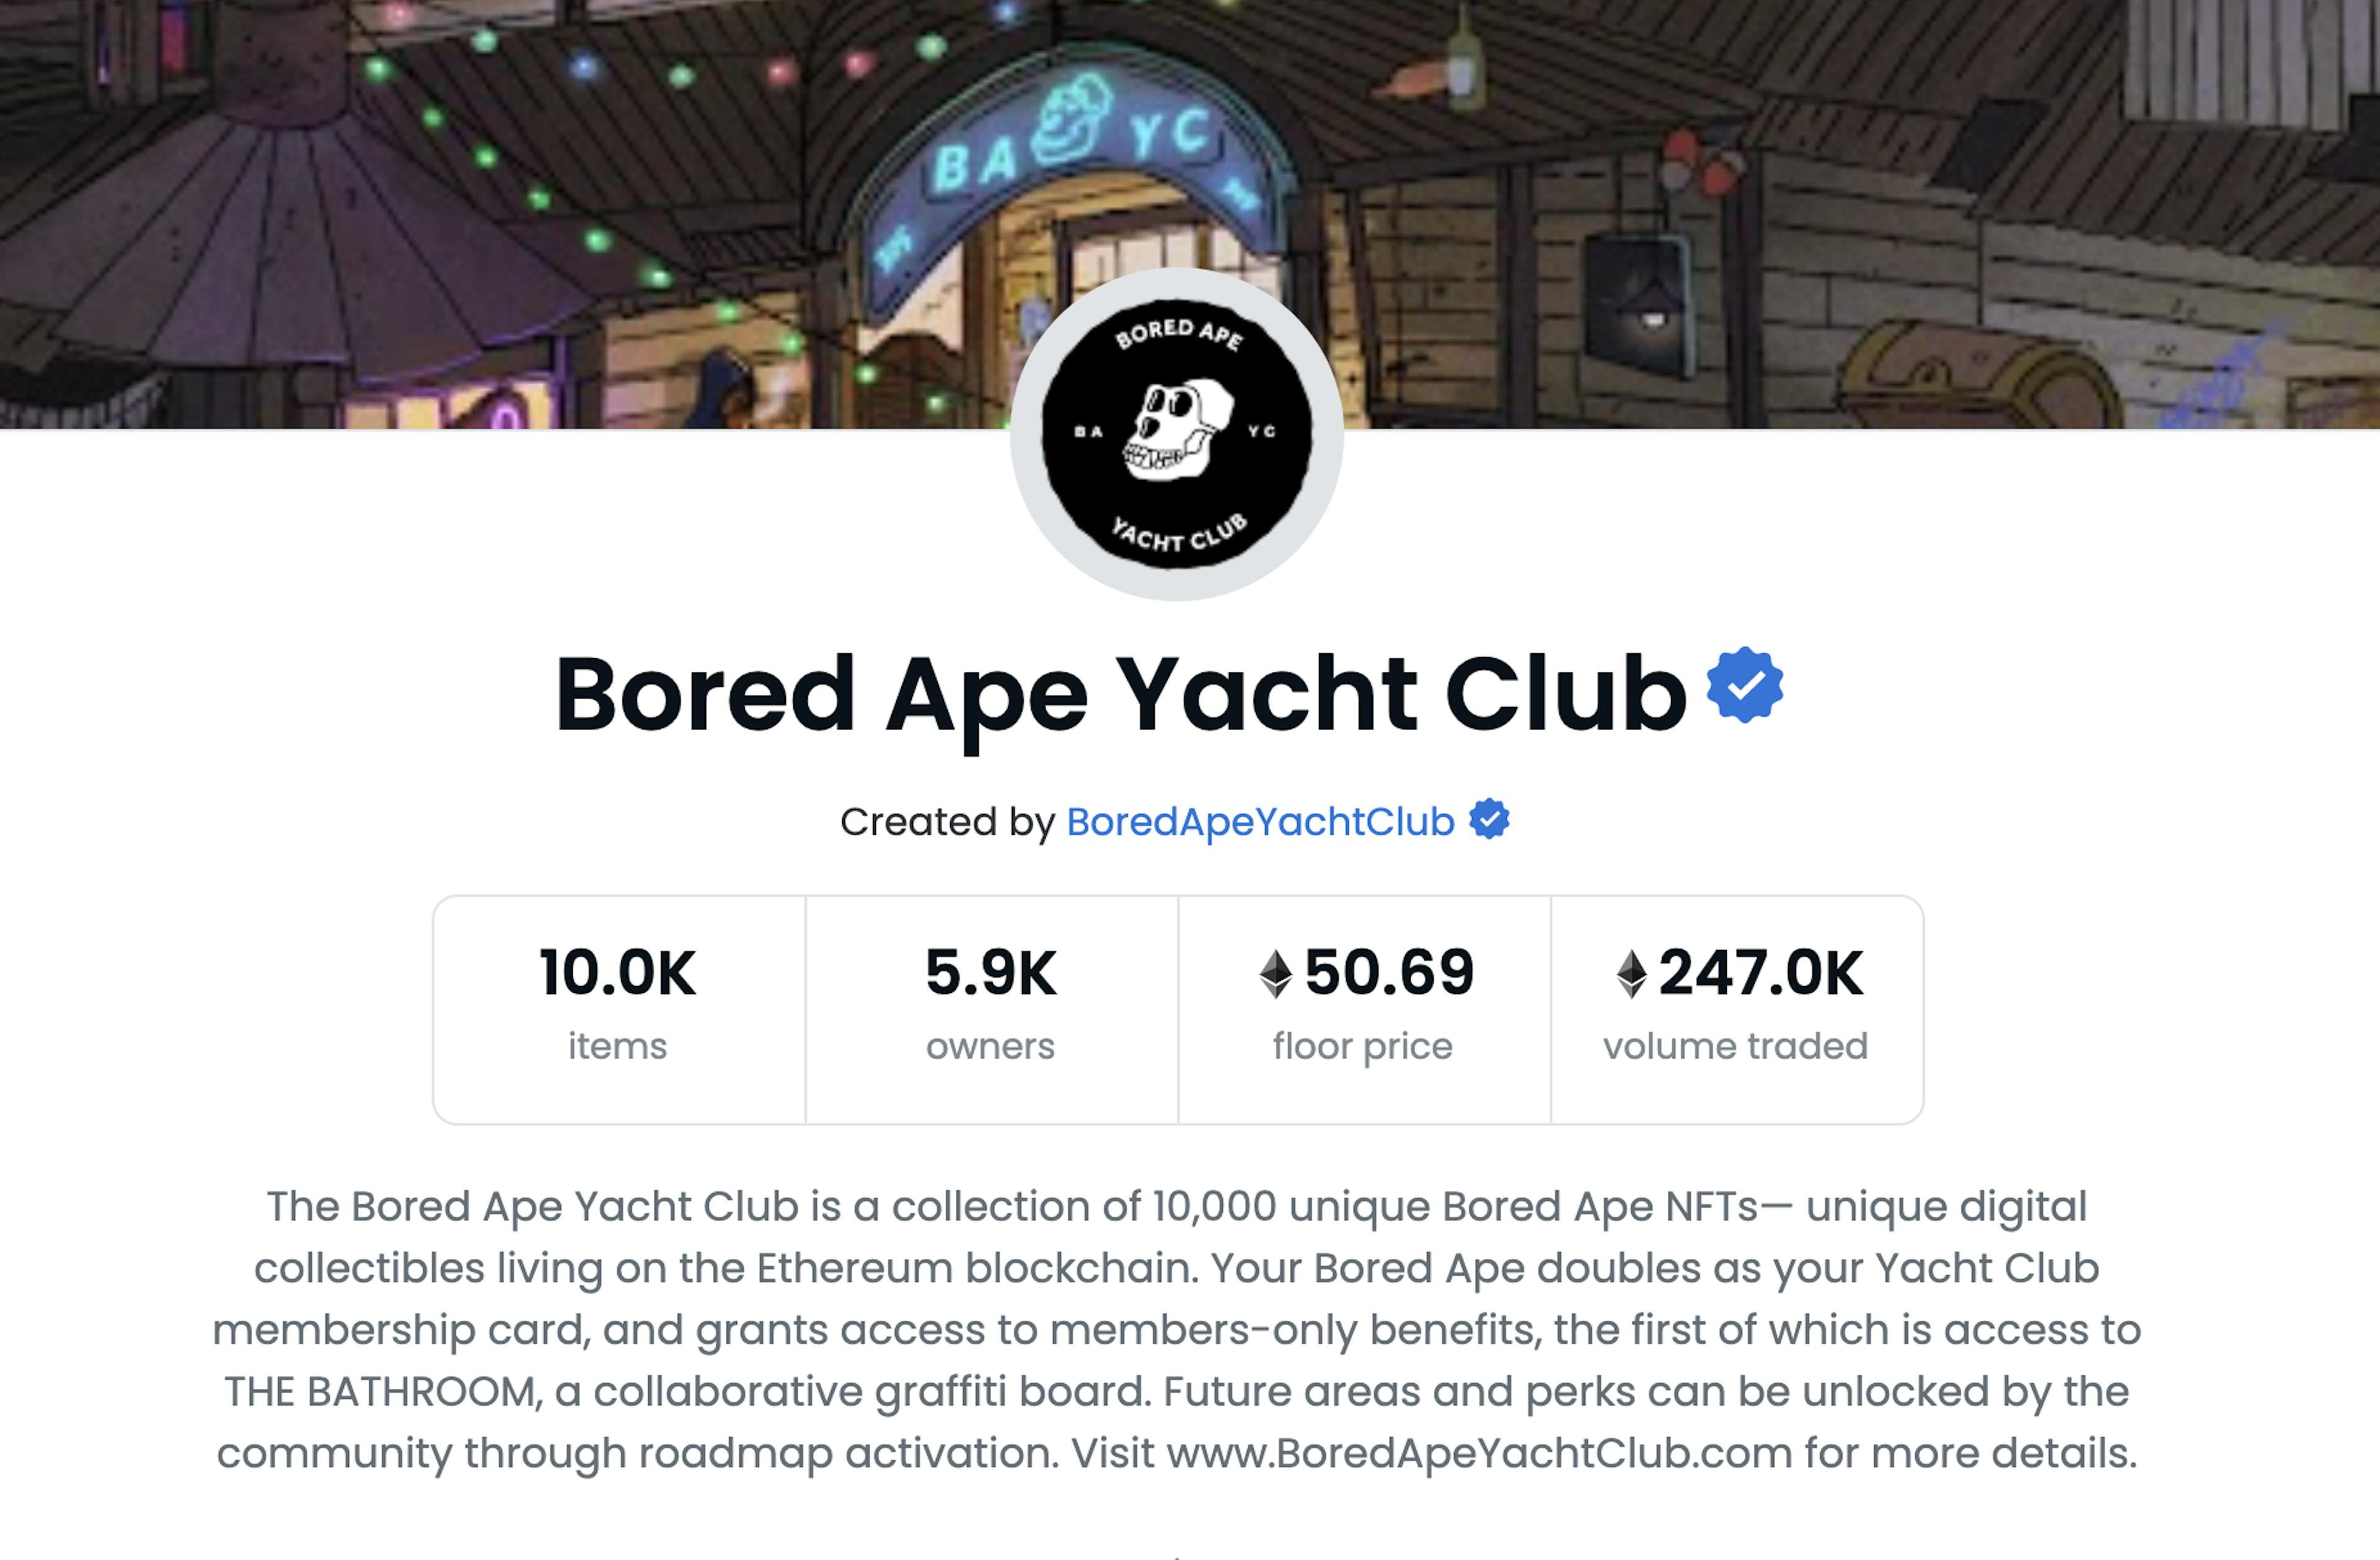 The official page of the Bored Ape Yacht Club project on Open Sea